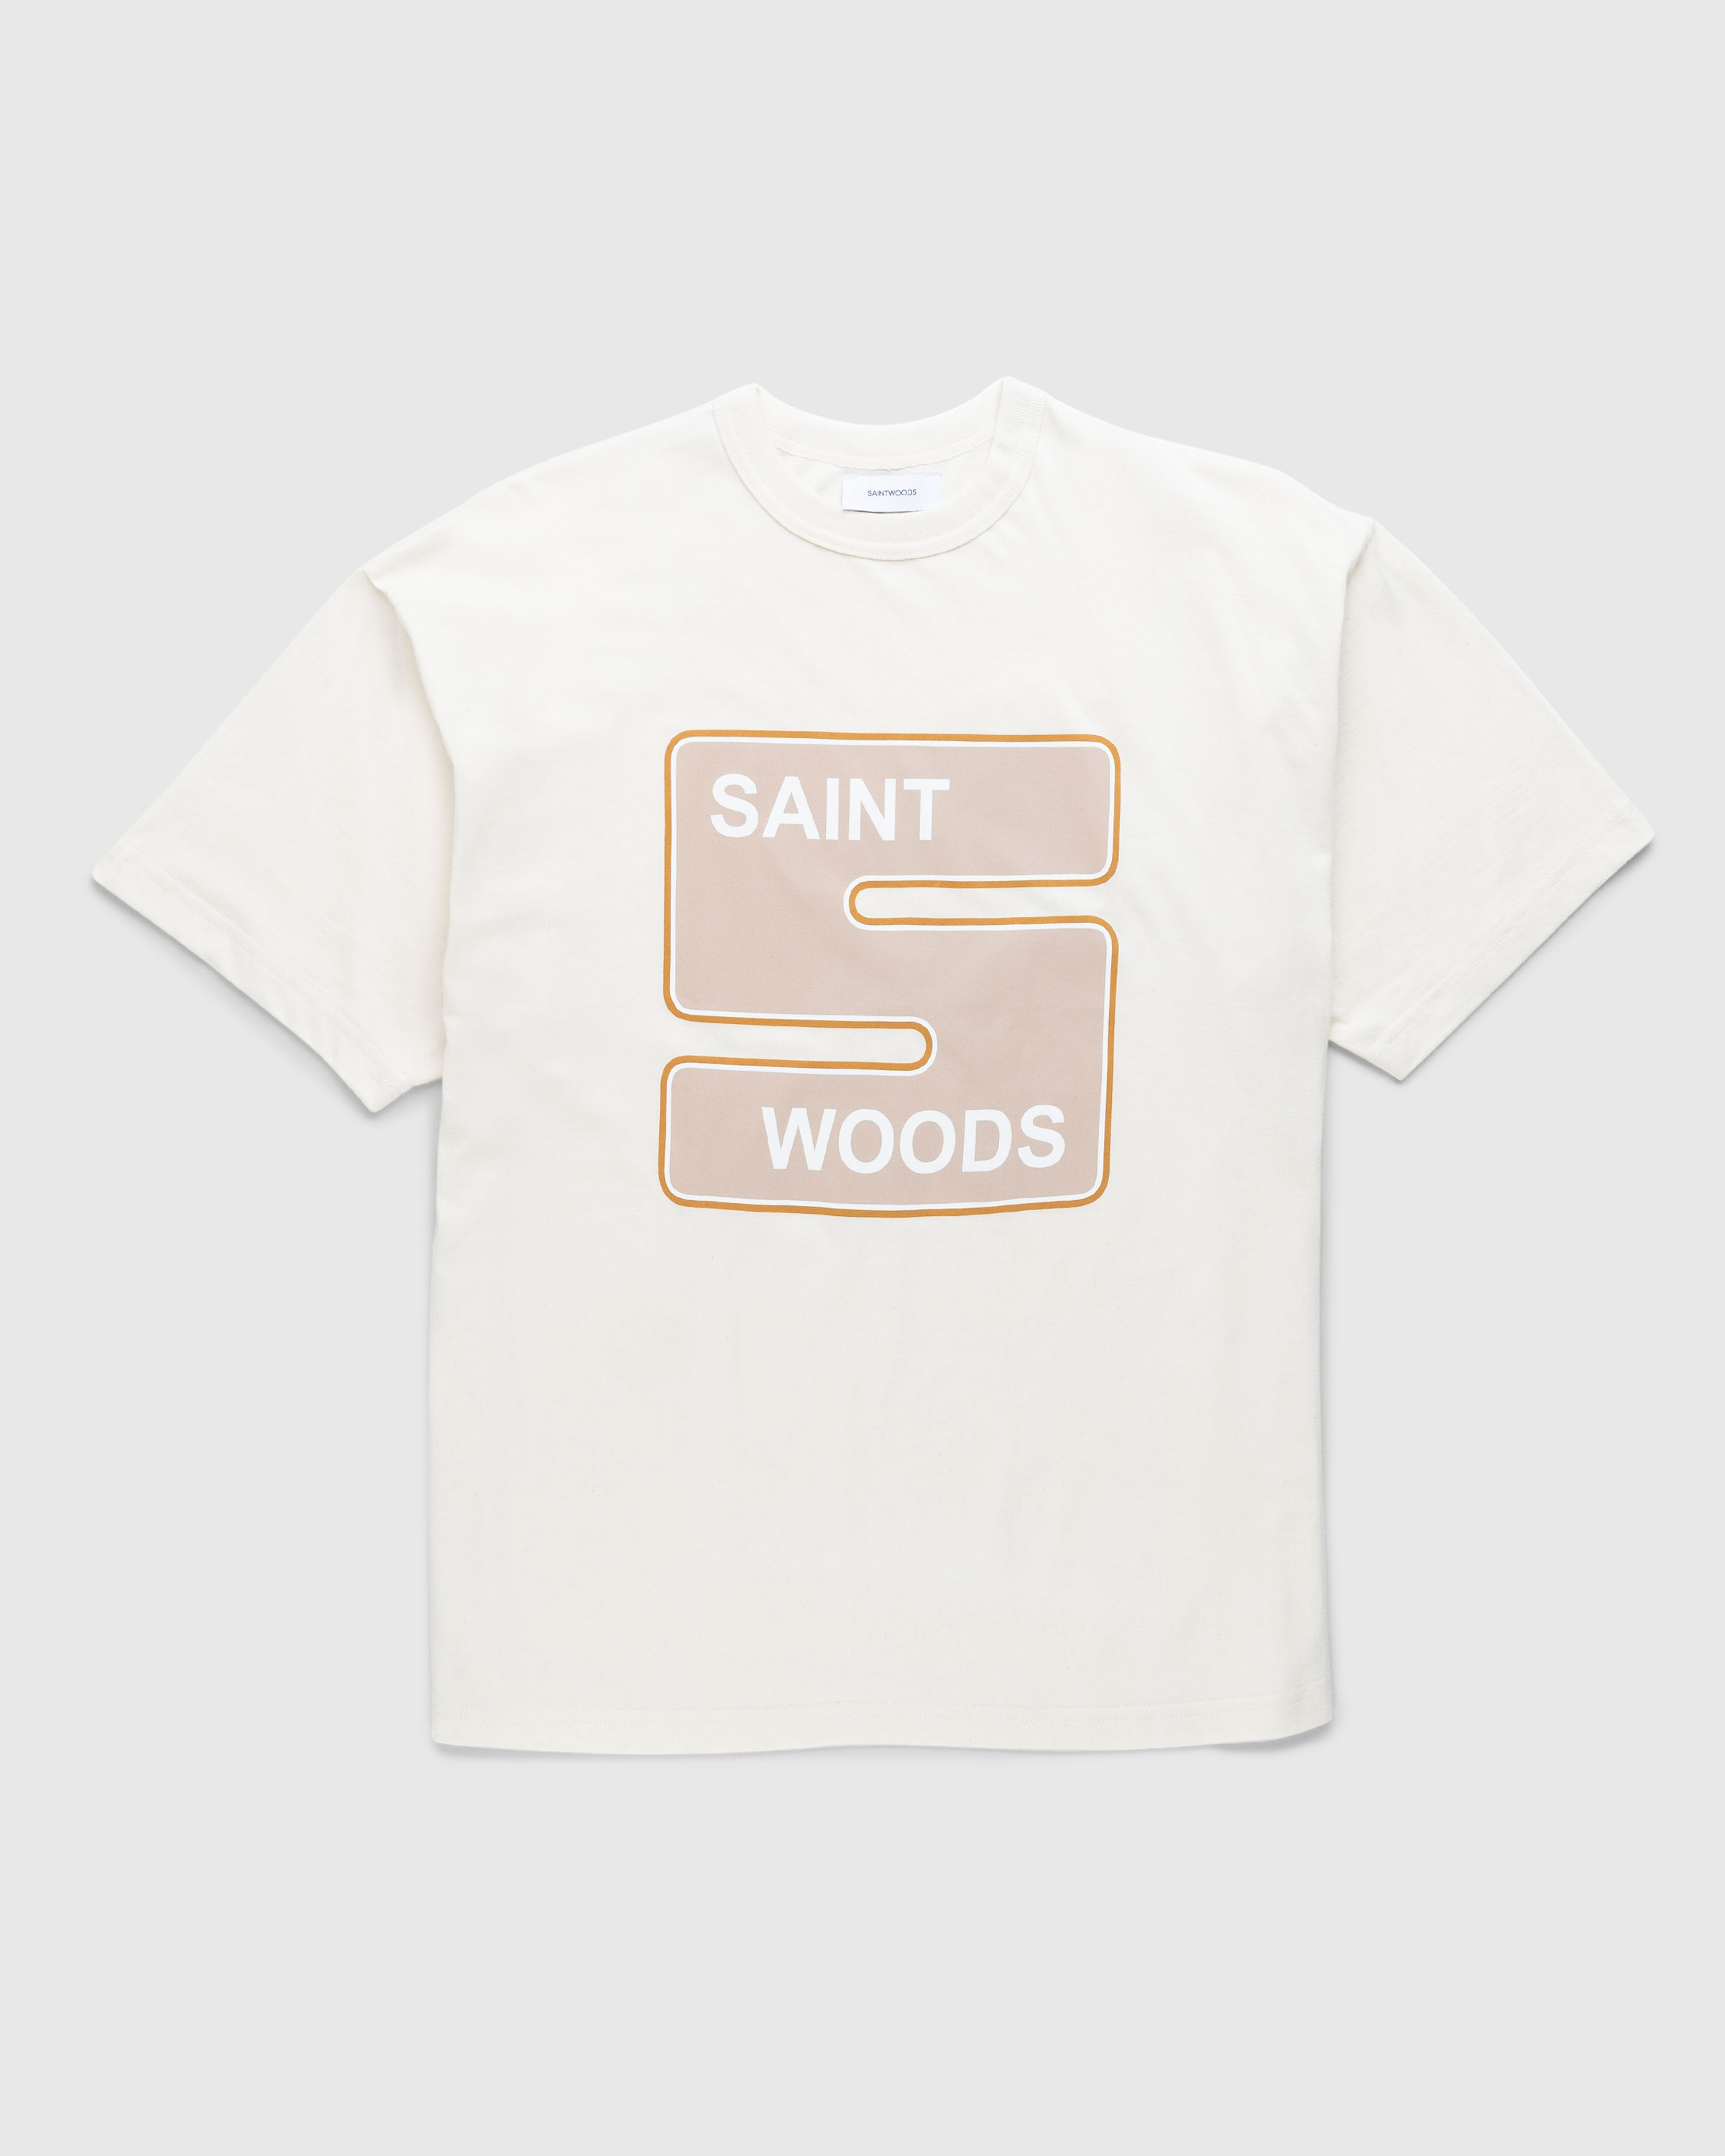 Saintwoods - You Go Tee Natural - Clothing - Beige - Image 1